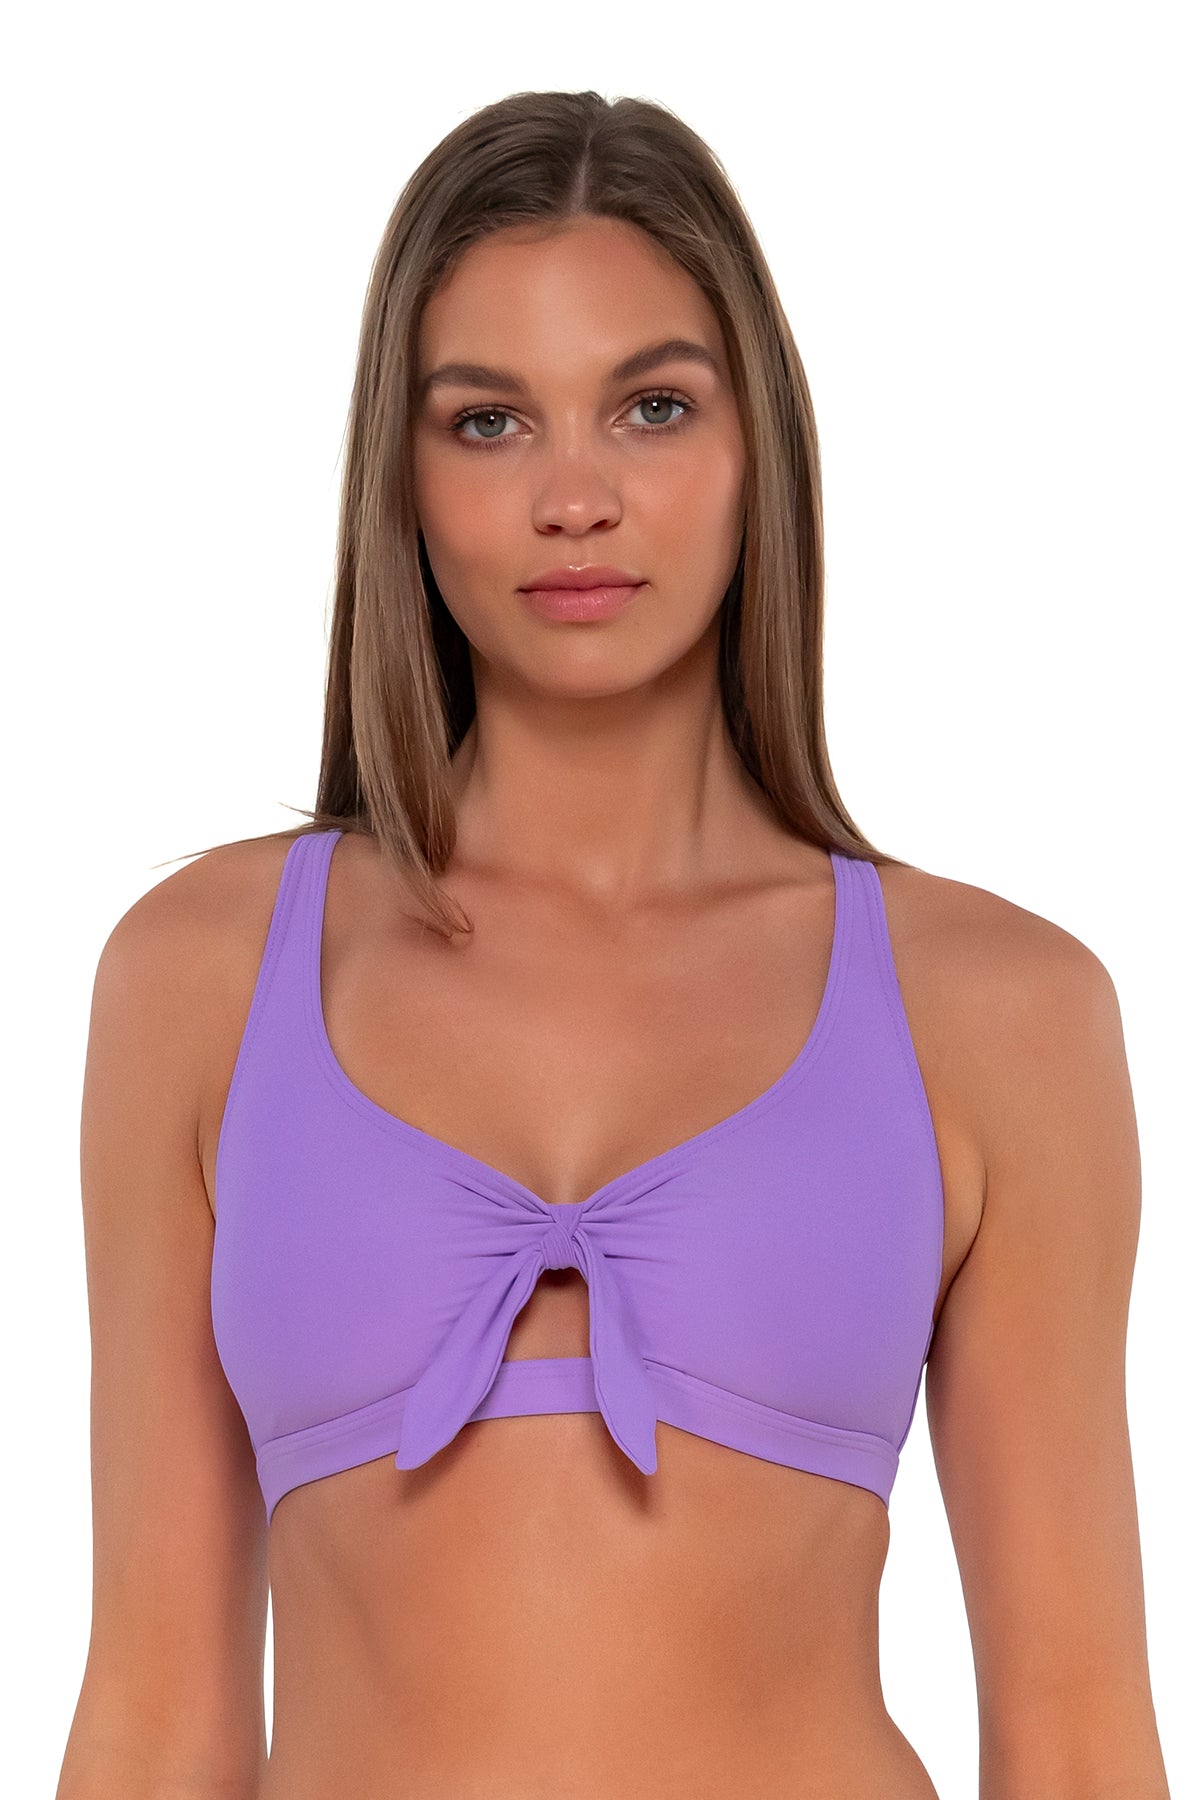 Front pose #1 of Daria wearing Sunsets Passion Flower Brandi Bralette Top showing keyhole front tie